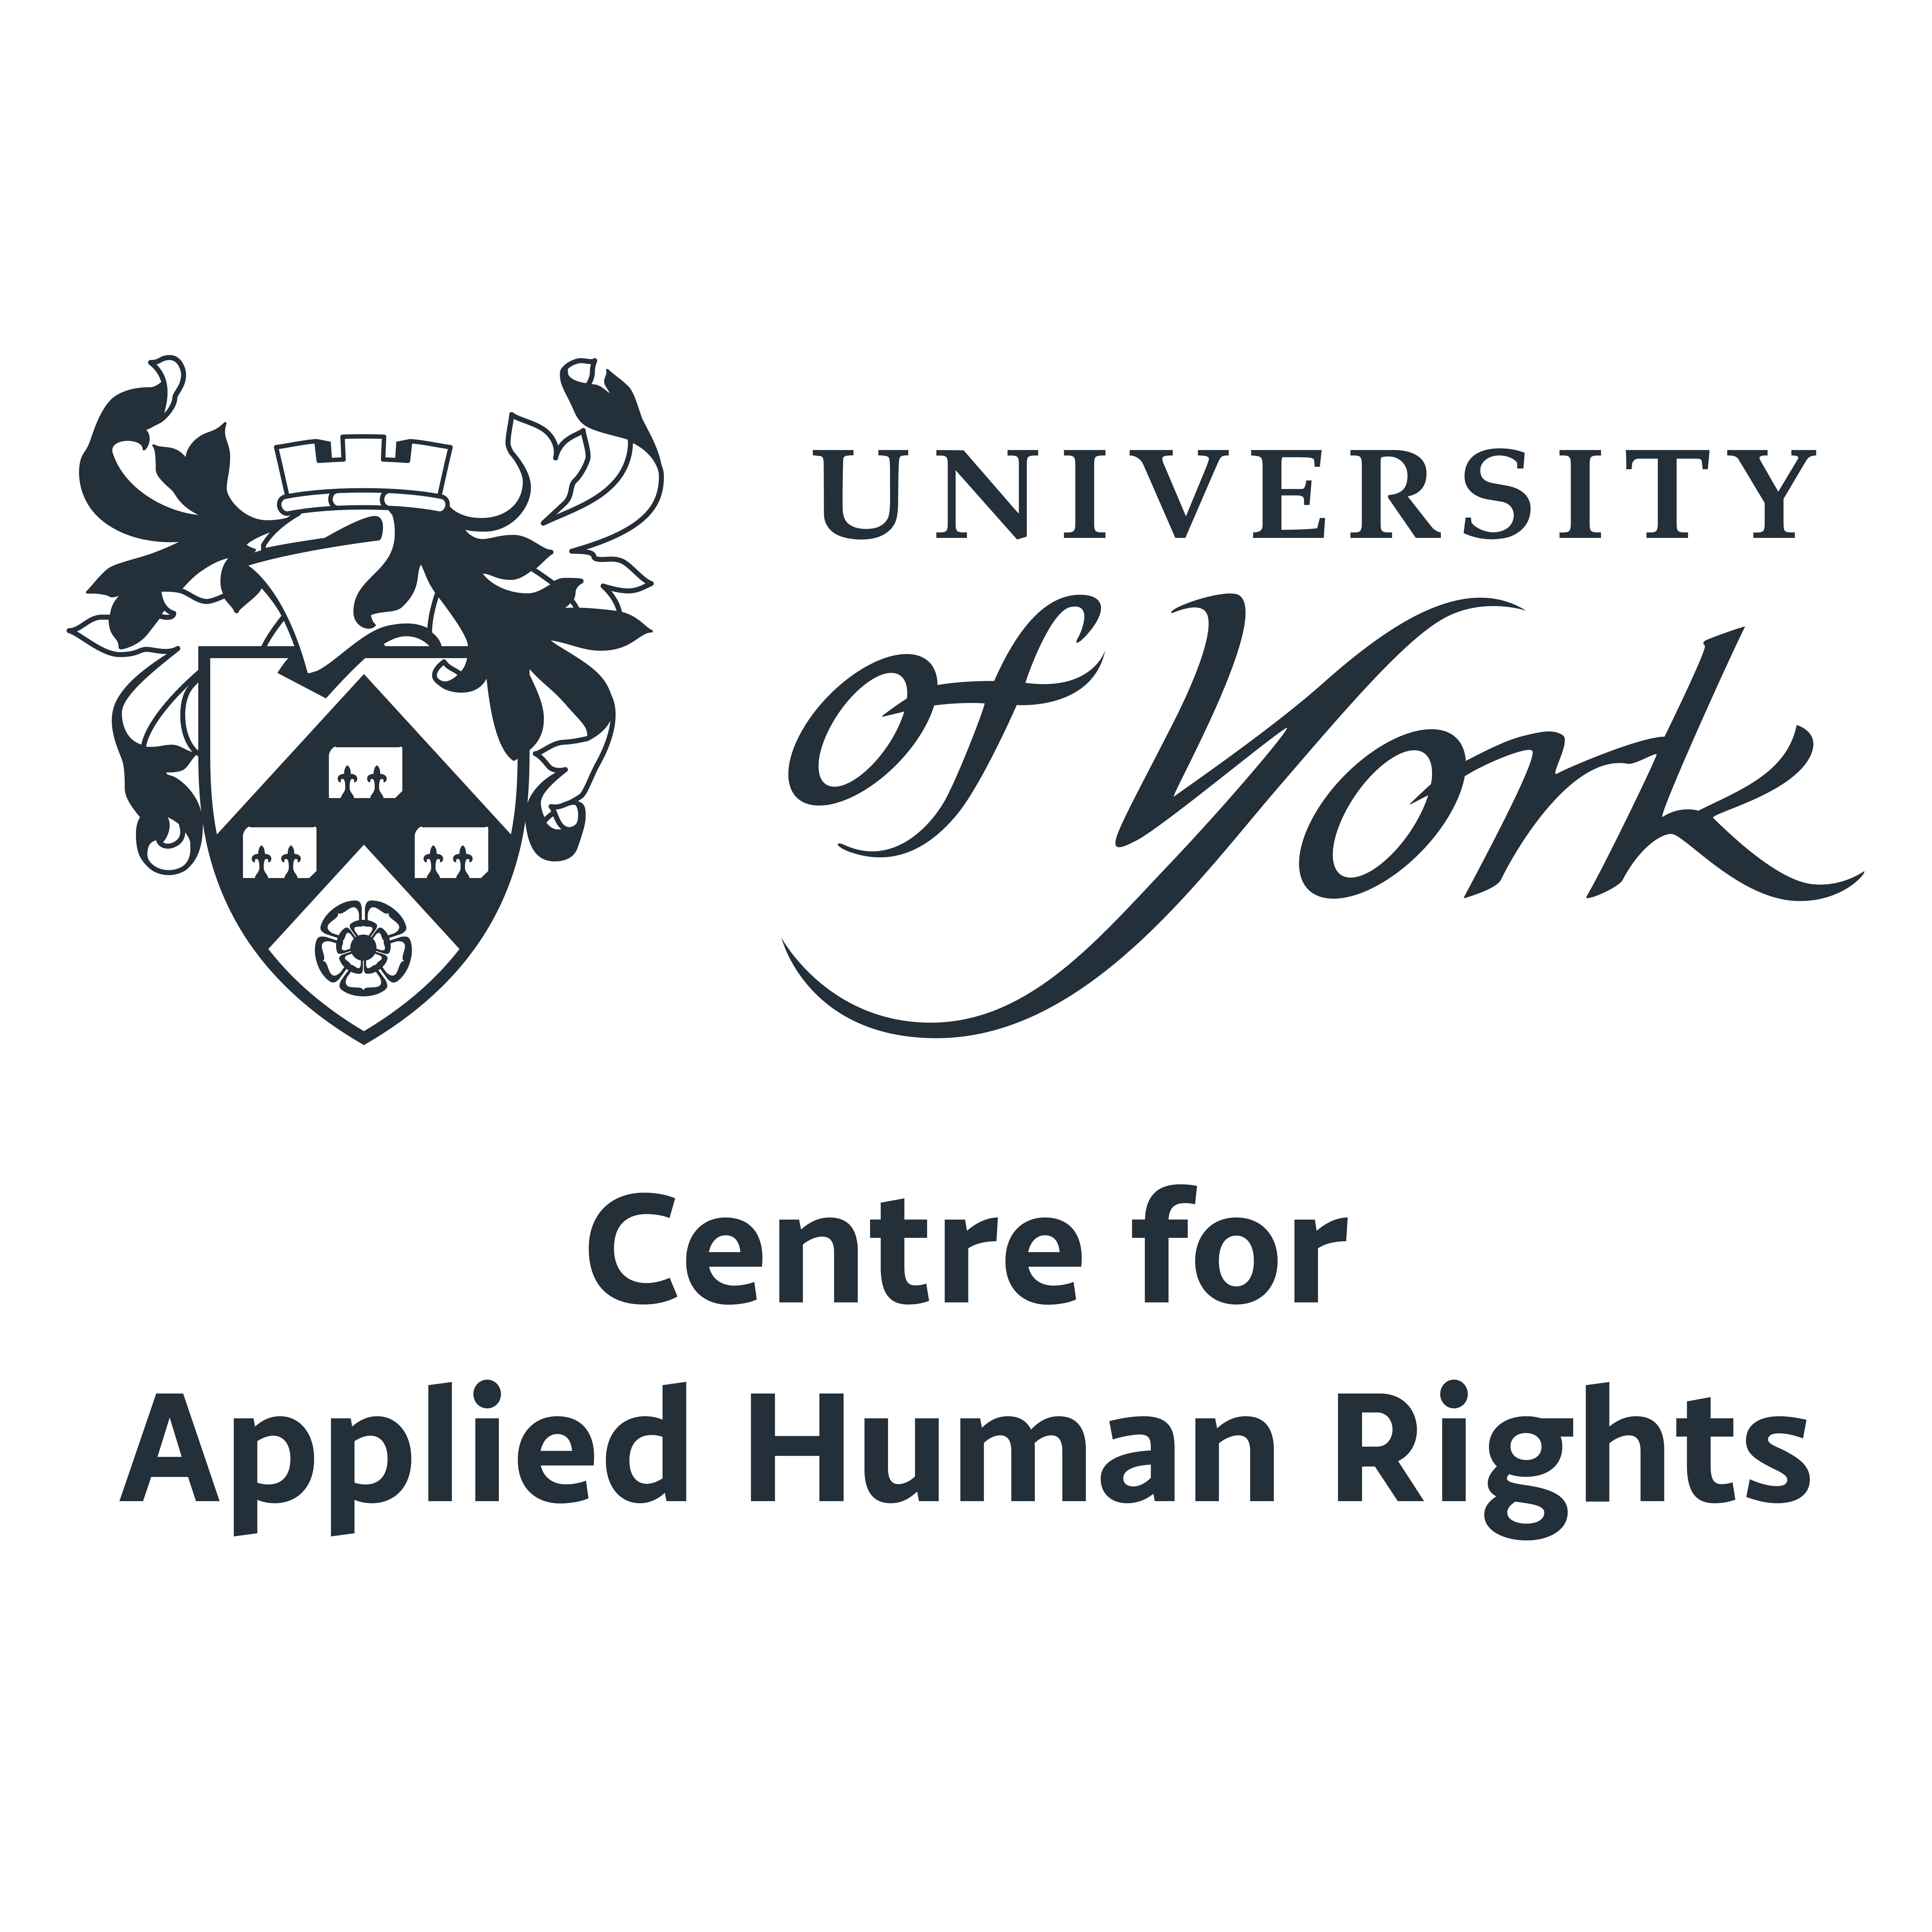 Centre for Applied Human Rights (CAHR), University of York